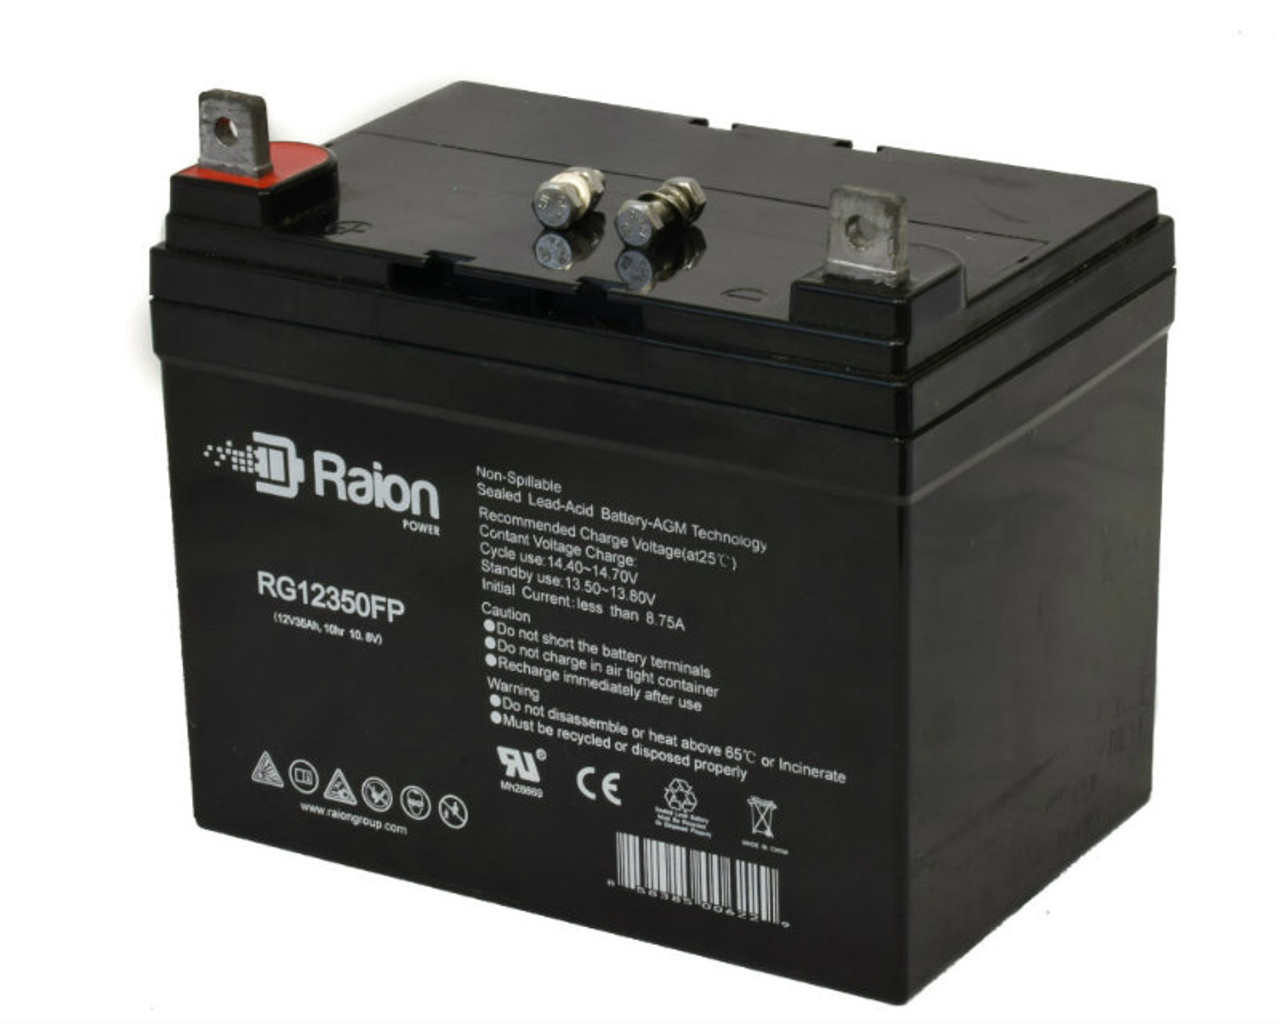 Raion Power Replacement 12V 35Ah RG12350FP Battery for Case International 220